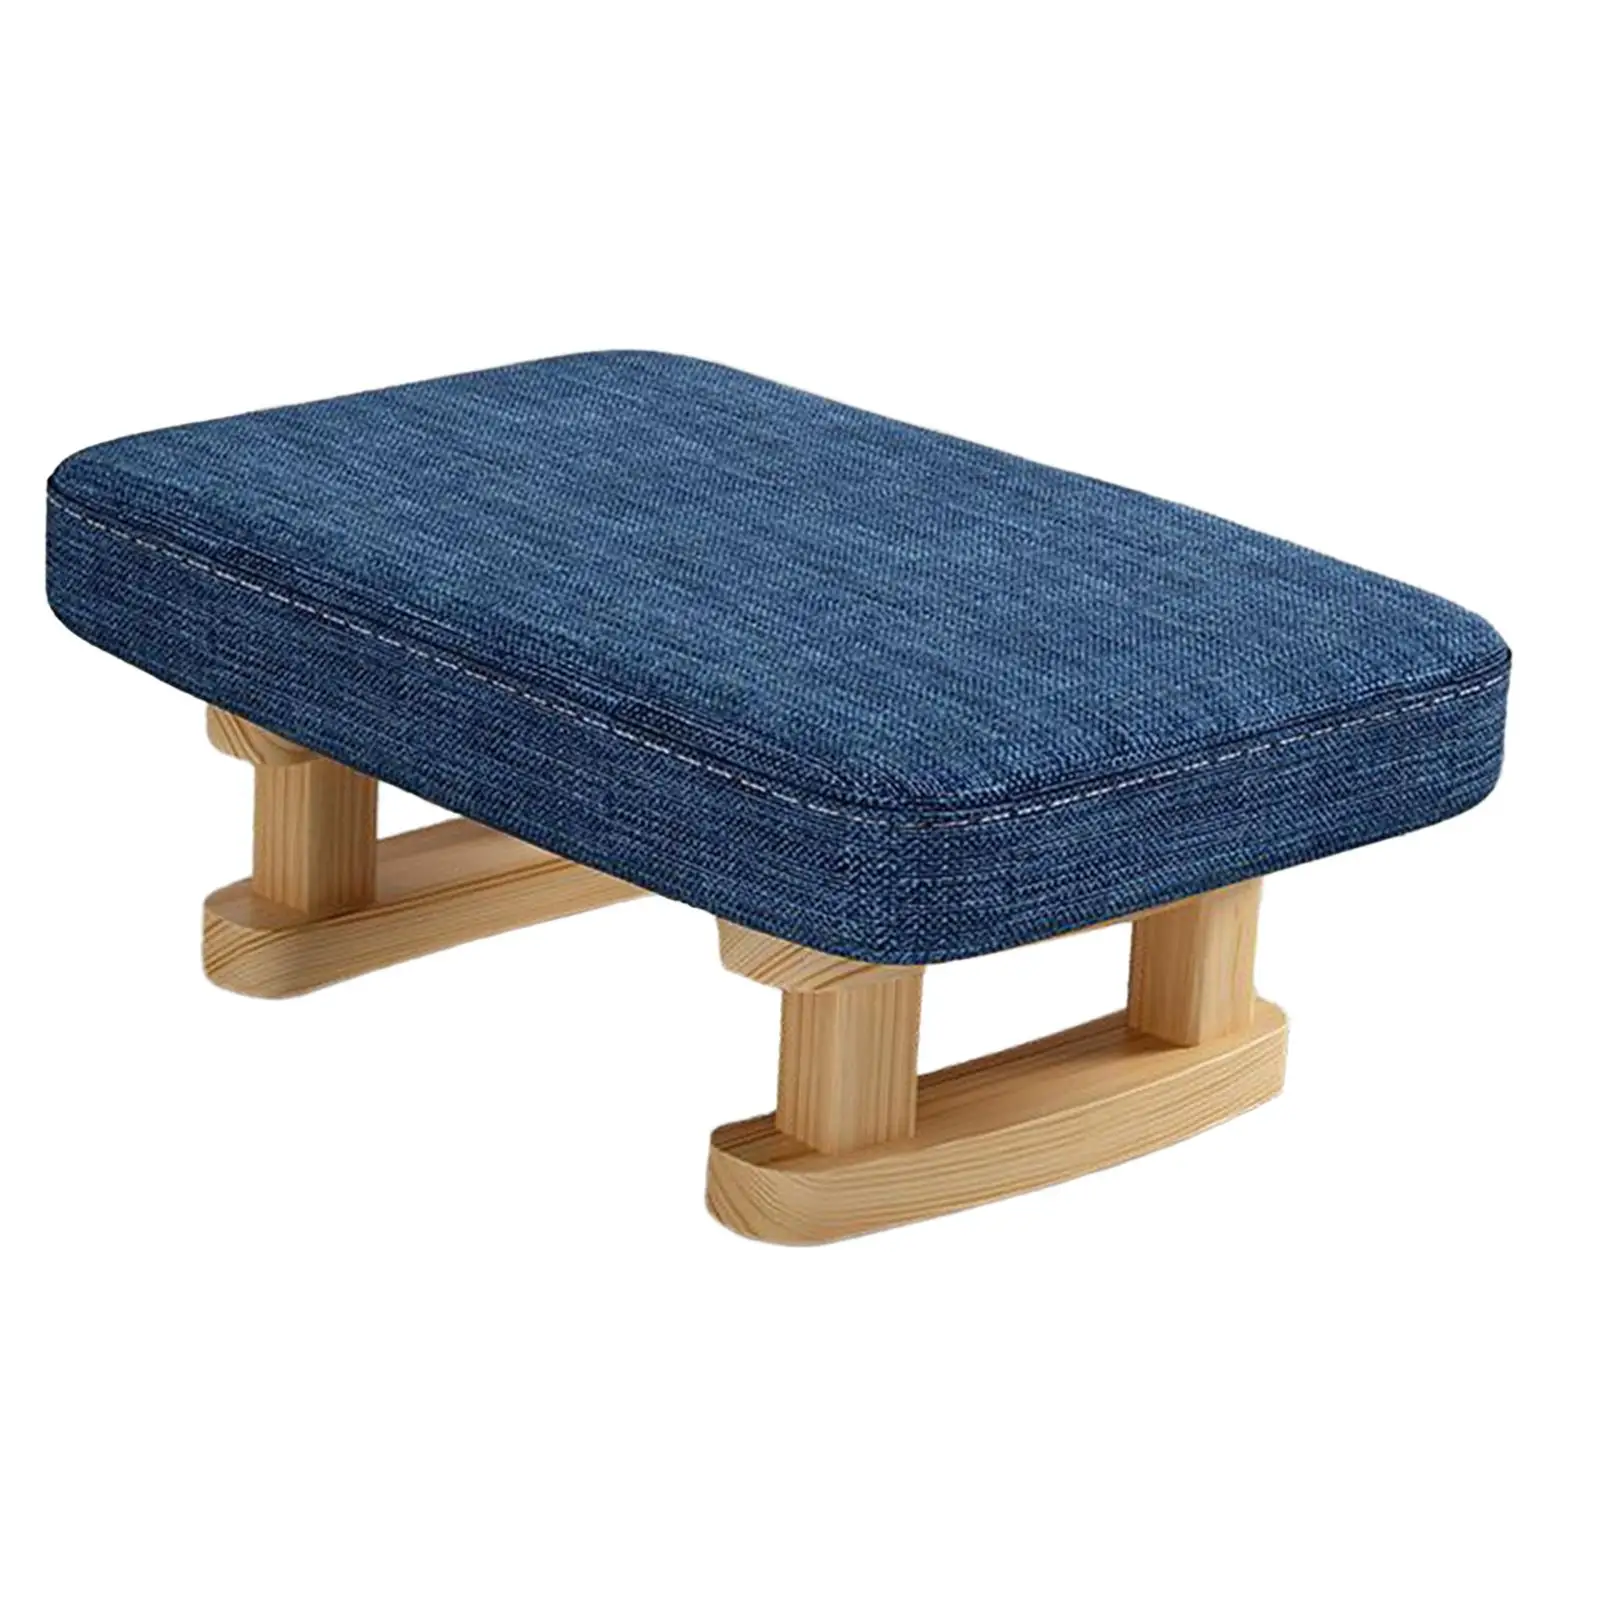 Padded Foot Stool Bench 41x30x18cm/16.14x11.81x7.09inch Rectangle Step Stool for Porch Bedroom Living Guest Room Playroom